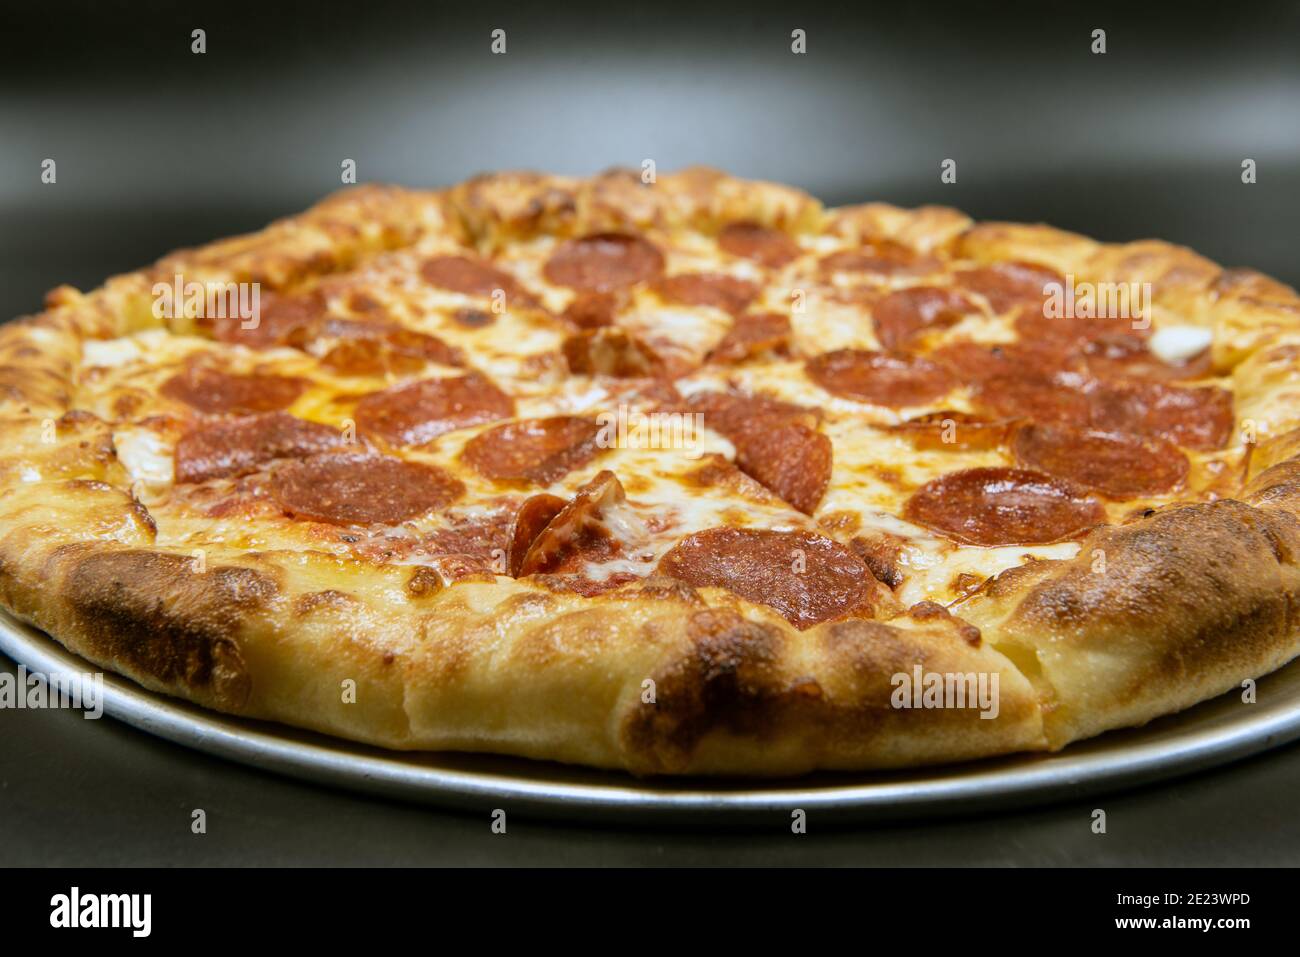 Stuffed crust pizza covered with pepperoni and melted cheese for a very hearty meal. Stock Photo